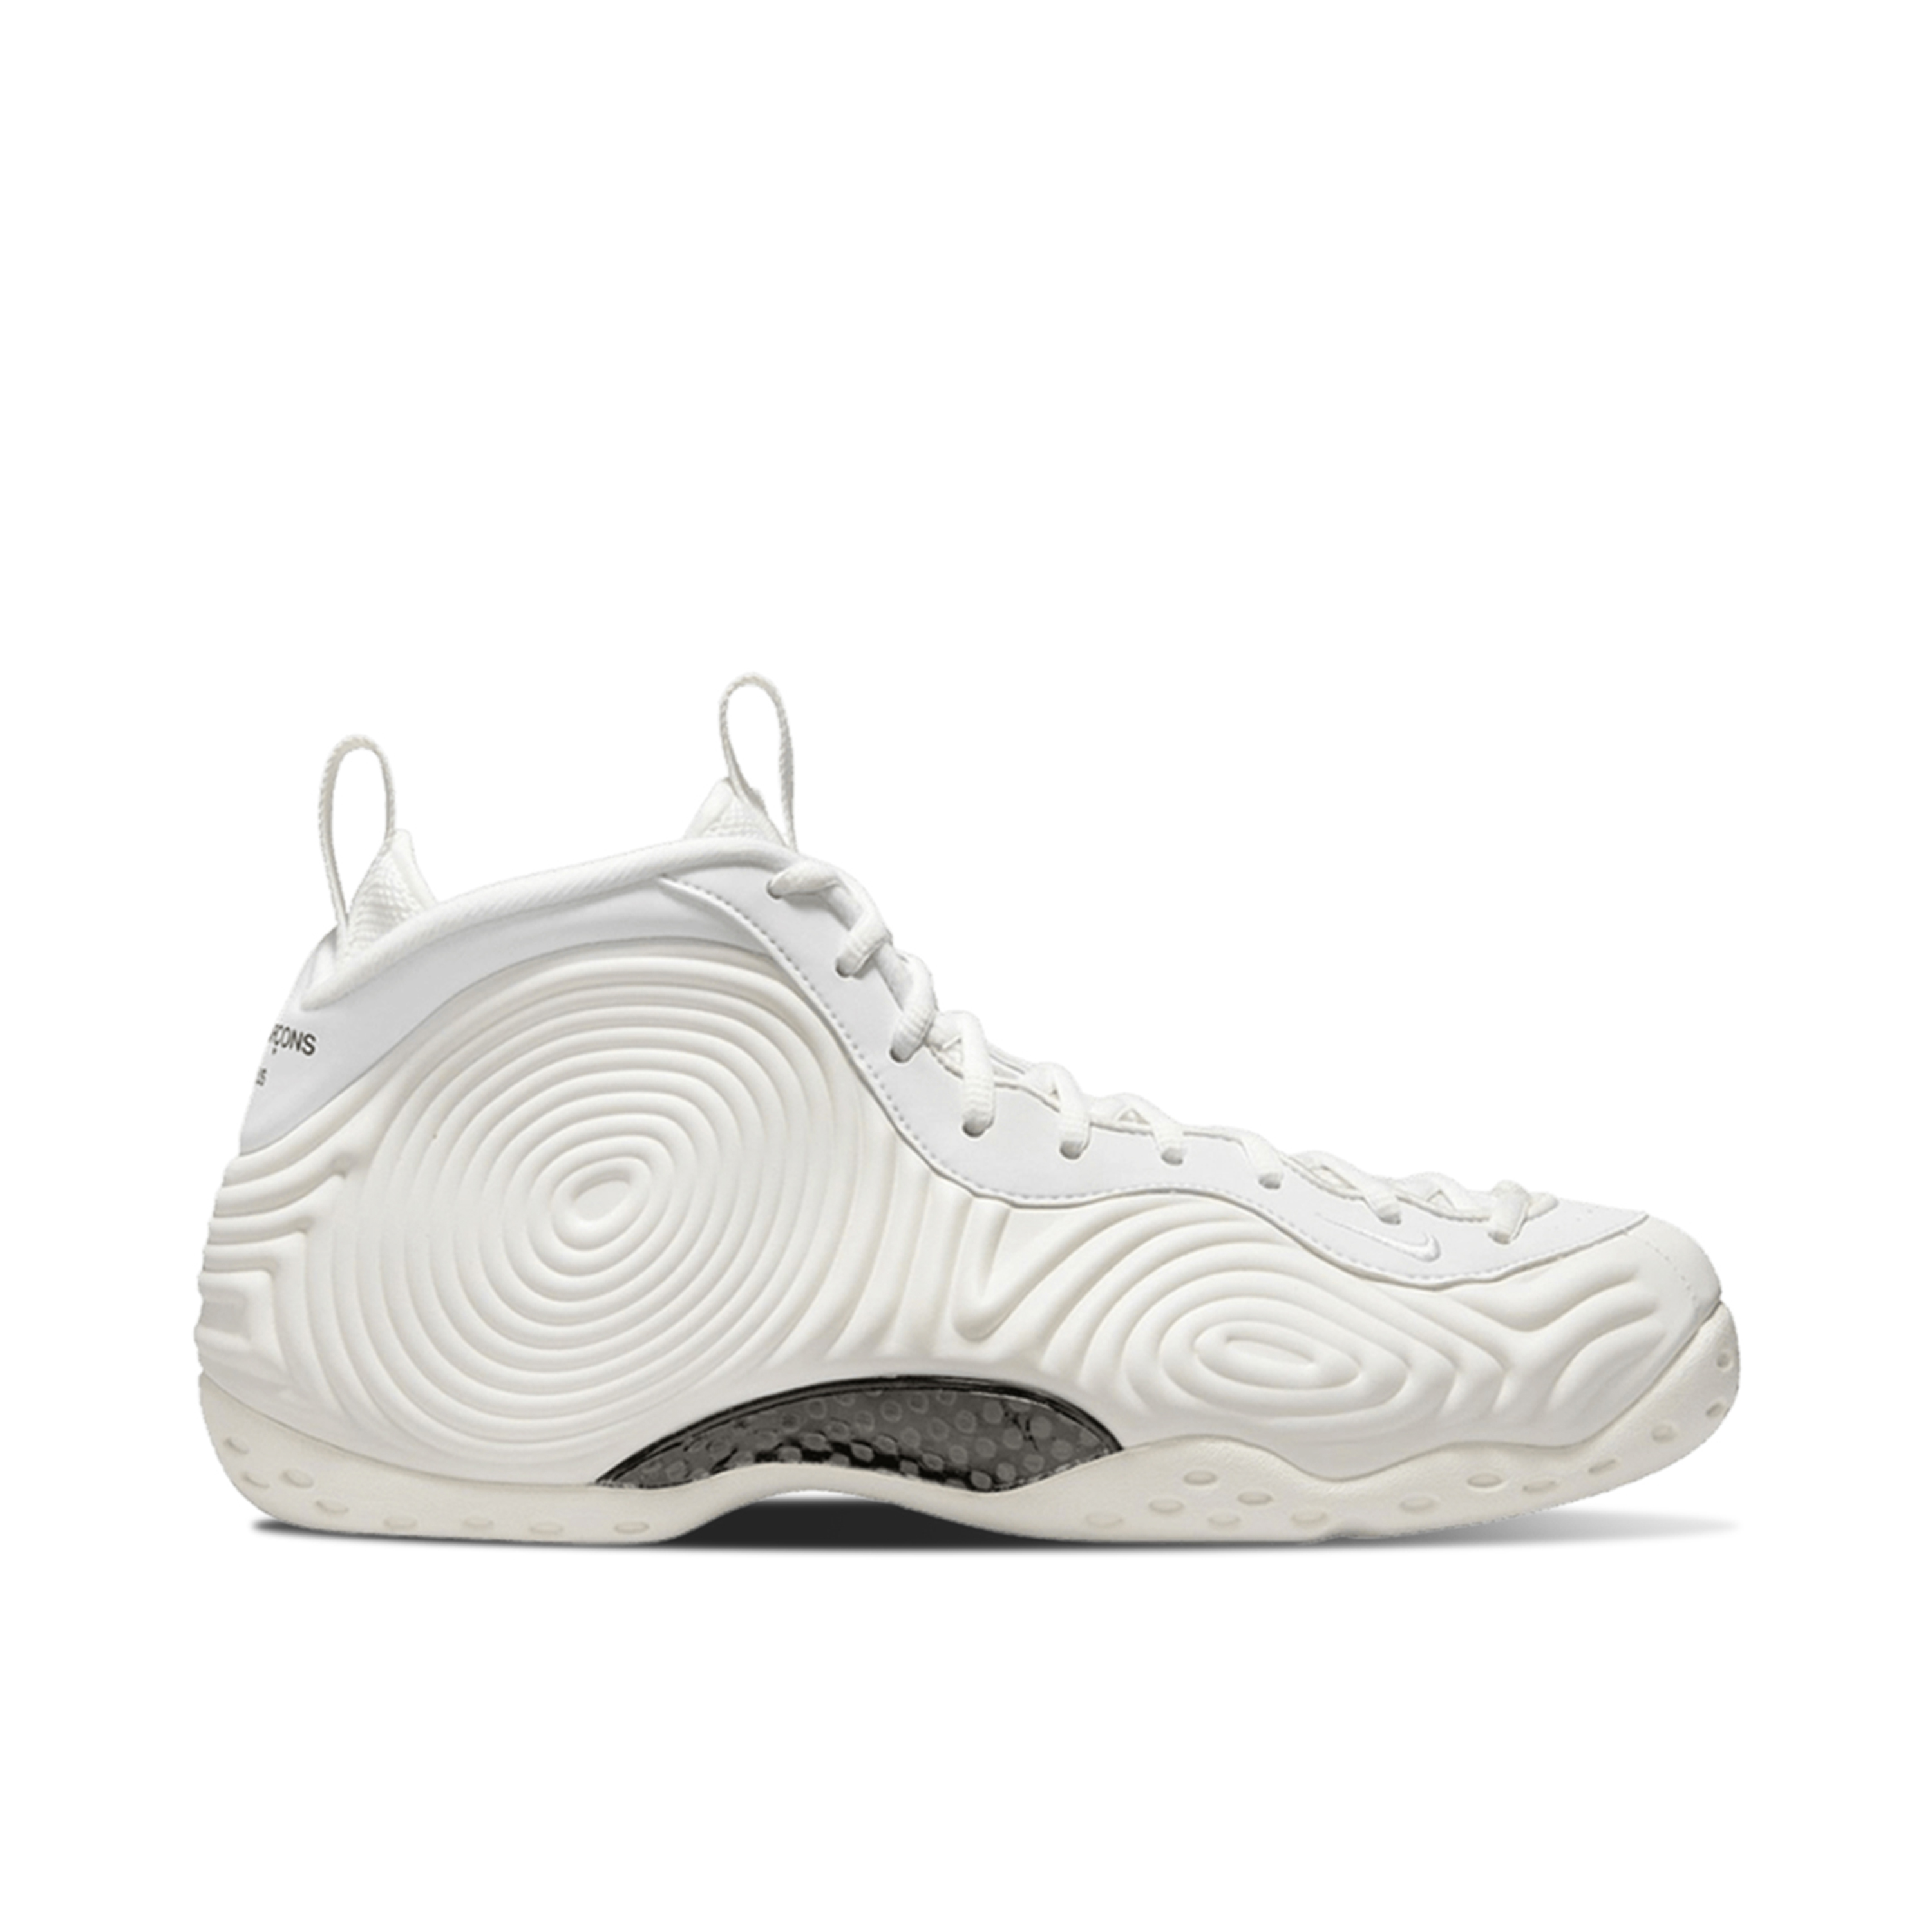 Comme des Garcons x Nike Air Foamposite One White